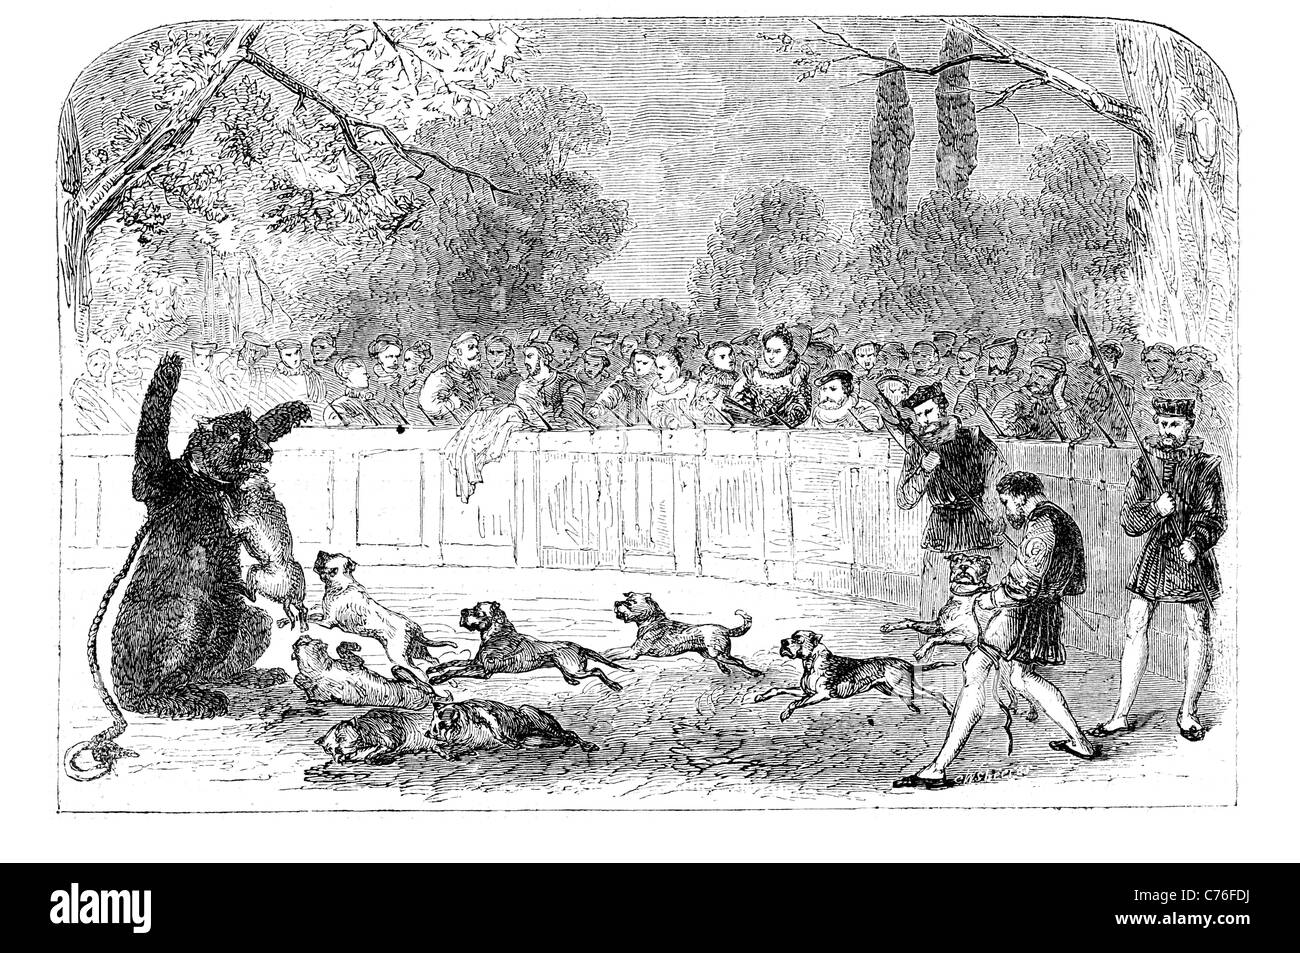 Bear baiting herds bears baiting gardens circular high fenced area pit spectators chained leg neck trained hunting dogs wounded Stock Photo